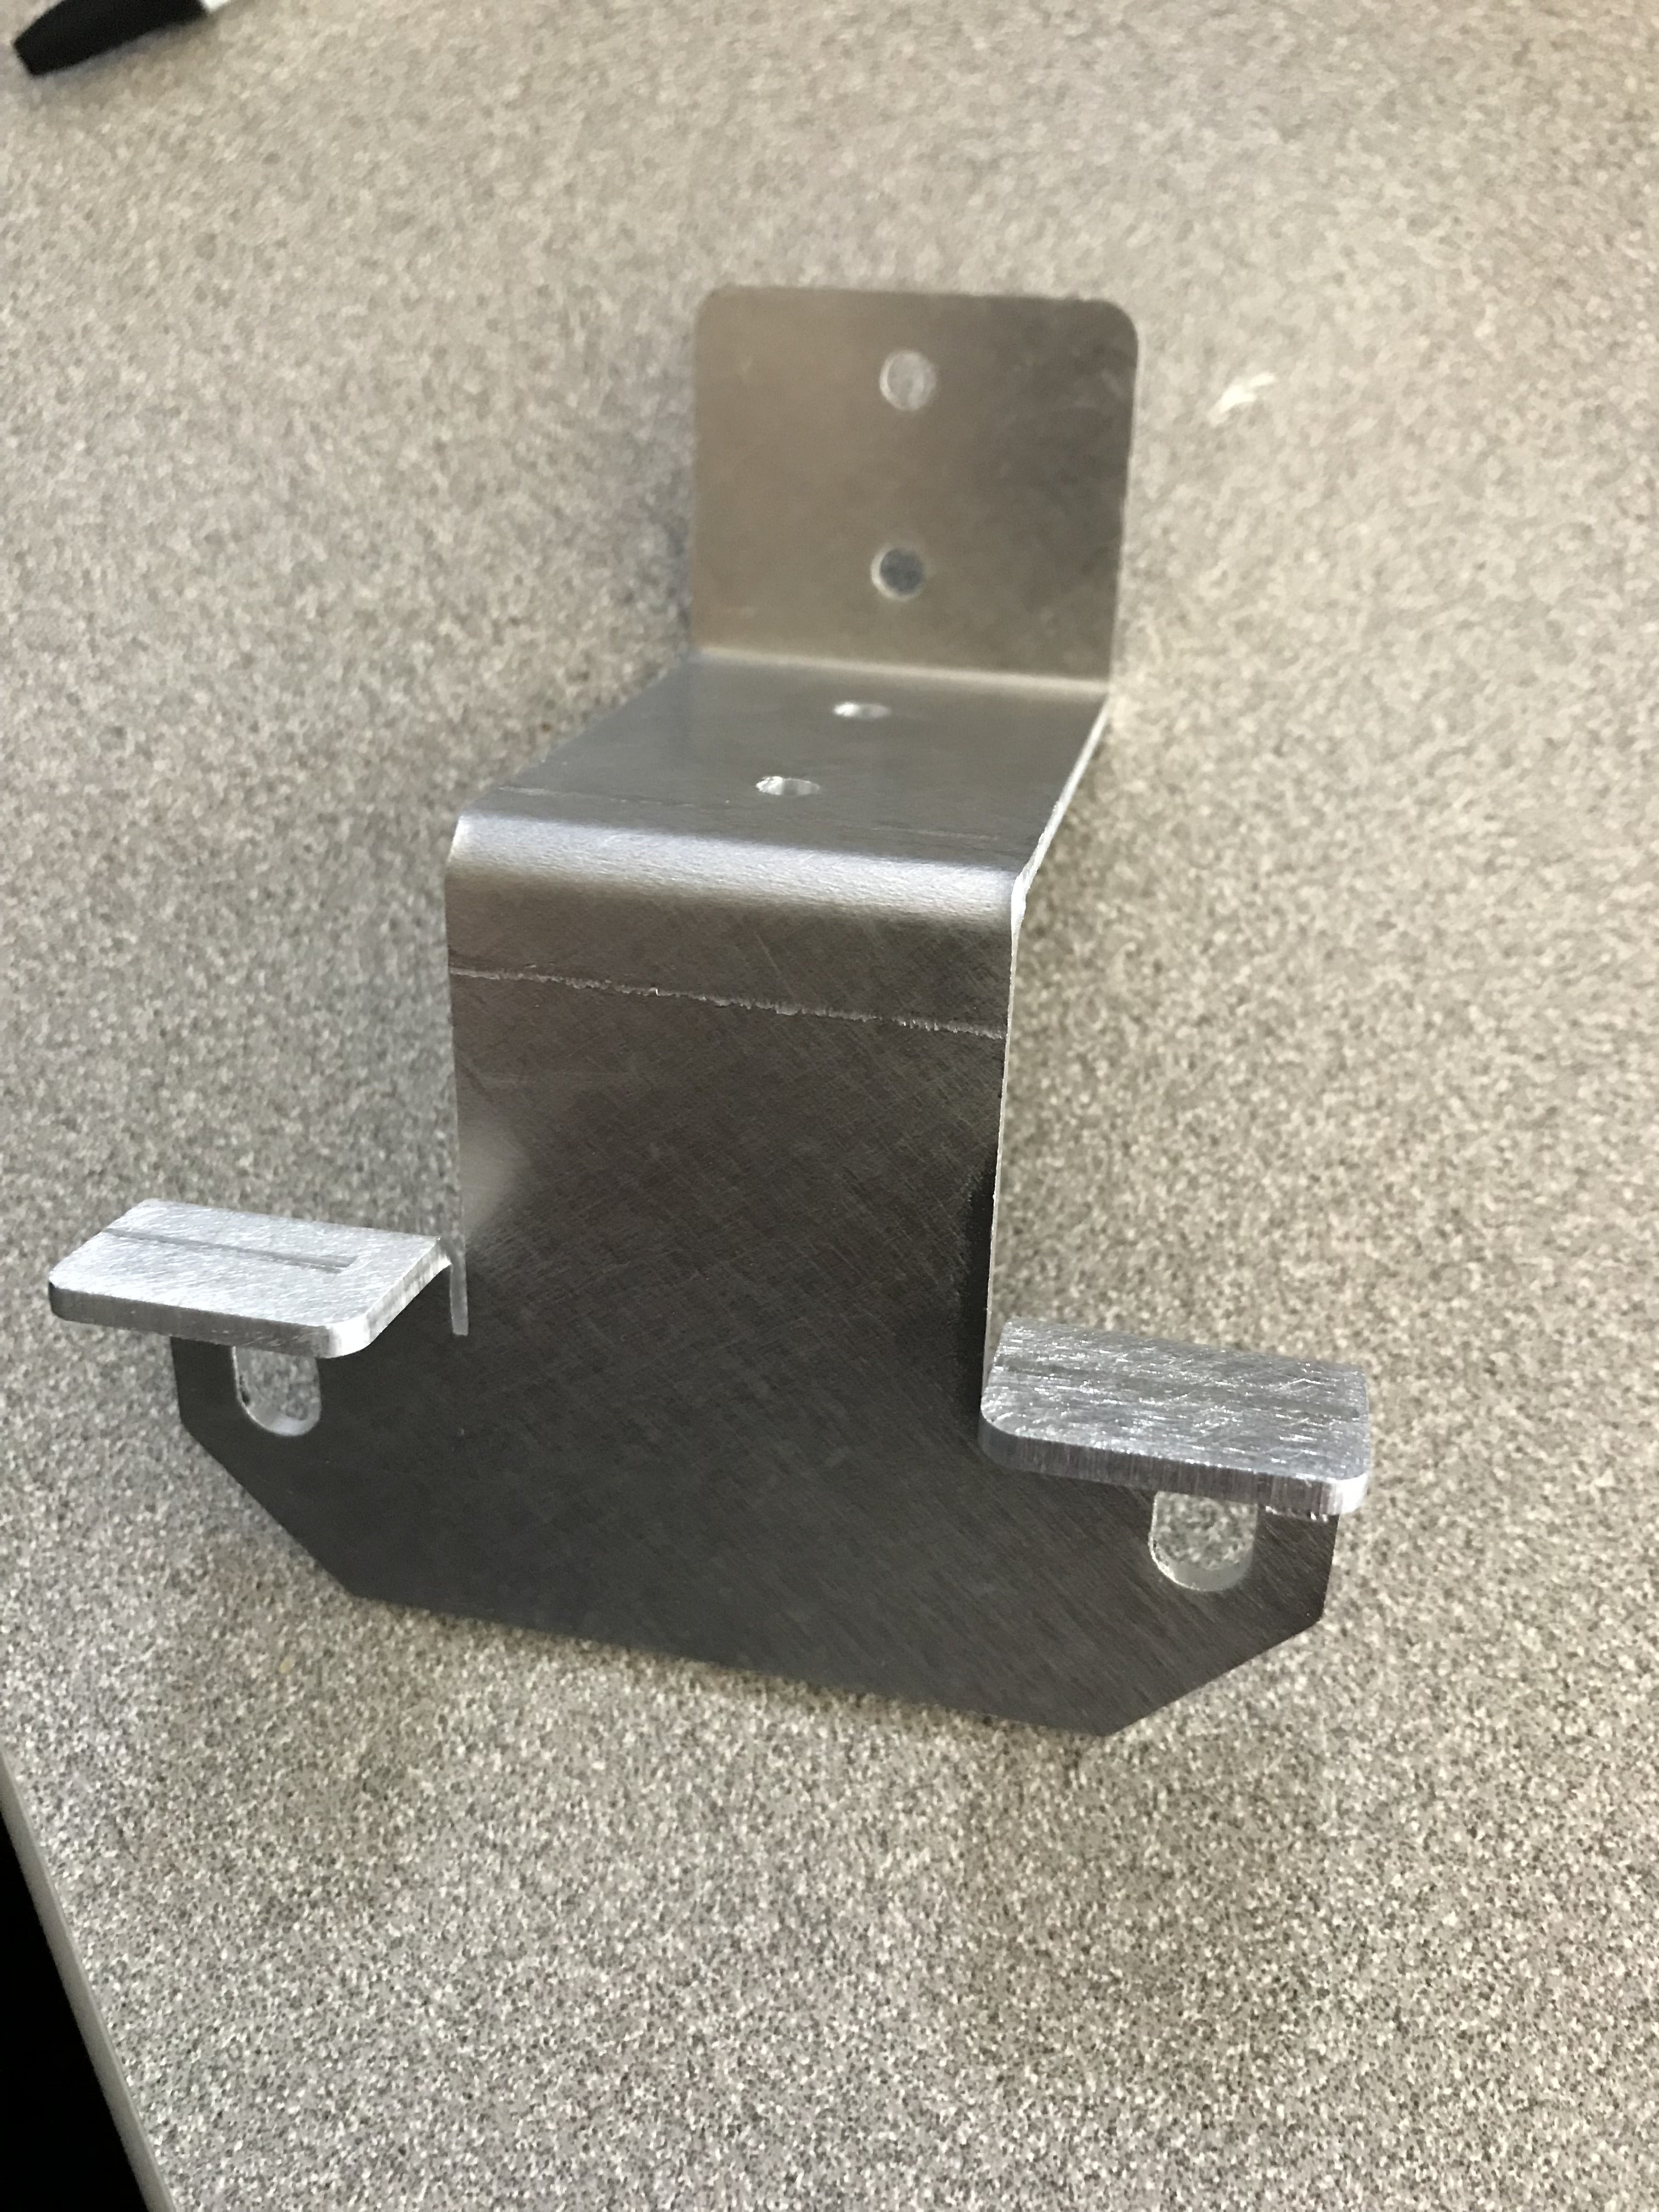 12 Gauge Aluminum Framing Brackets for Steel Stud Framing the inside of Shipping Containers